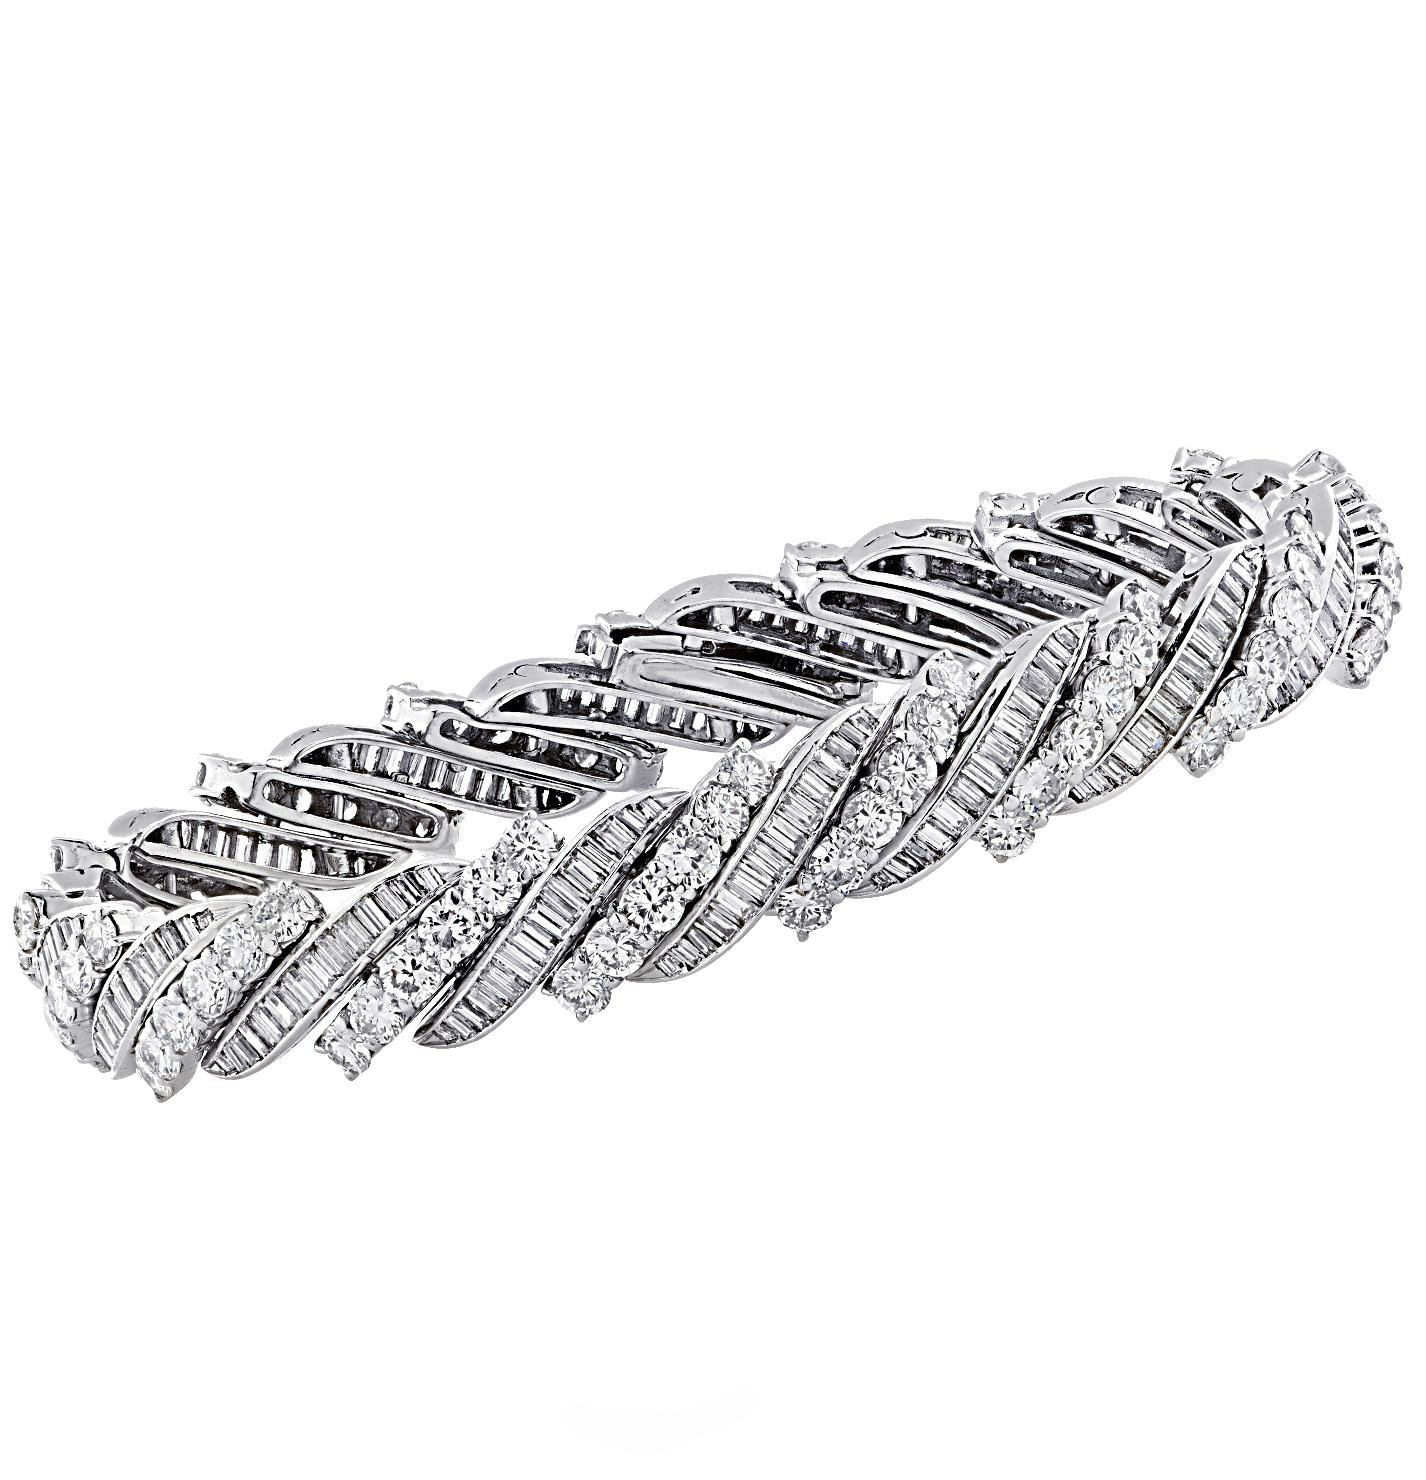 Spectacular mid-century diamond bracelet, circa 1960s, crafted in platinum, showcasing 268 mixed cut diamonds weighing approximately 13 carats total, F color, VS clarity. Typical of the 1960s, this stunning bracelet features alternating rows of